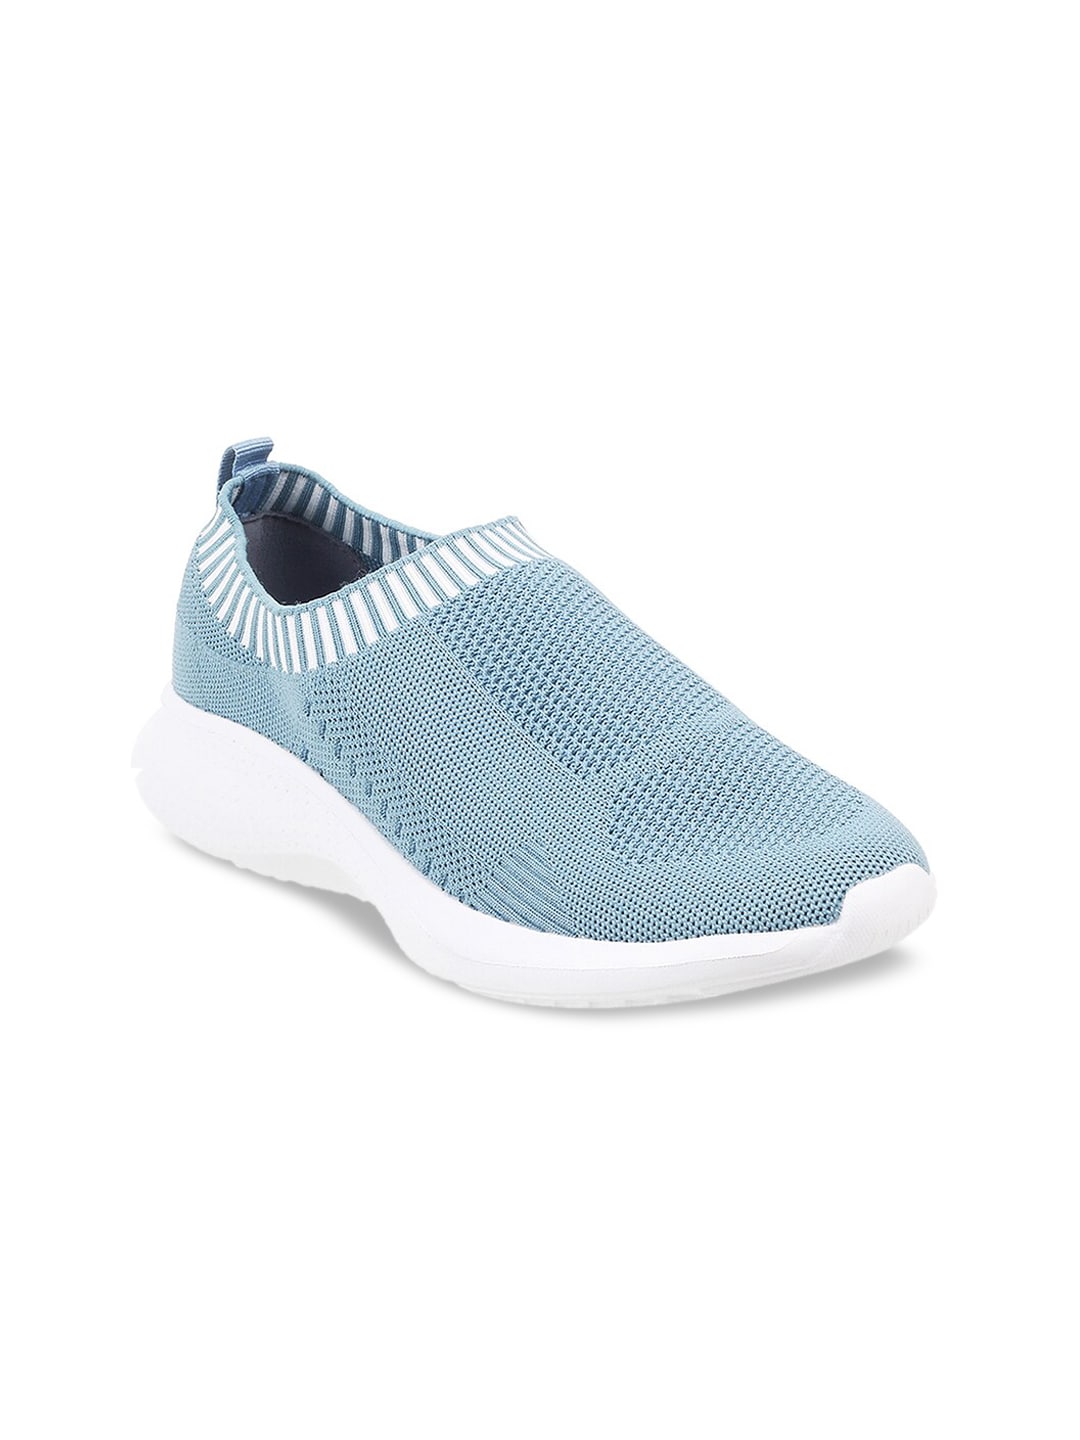 ACTIV Women Blue Printed Slip-On Sneakers Price in India